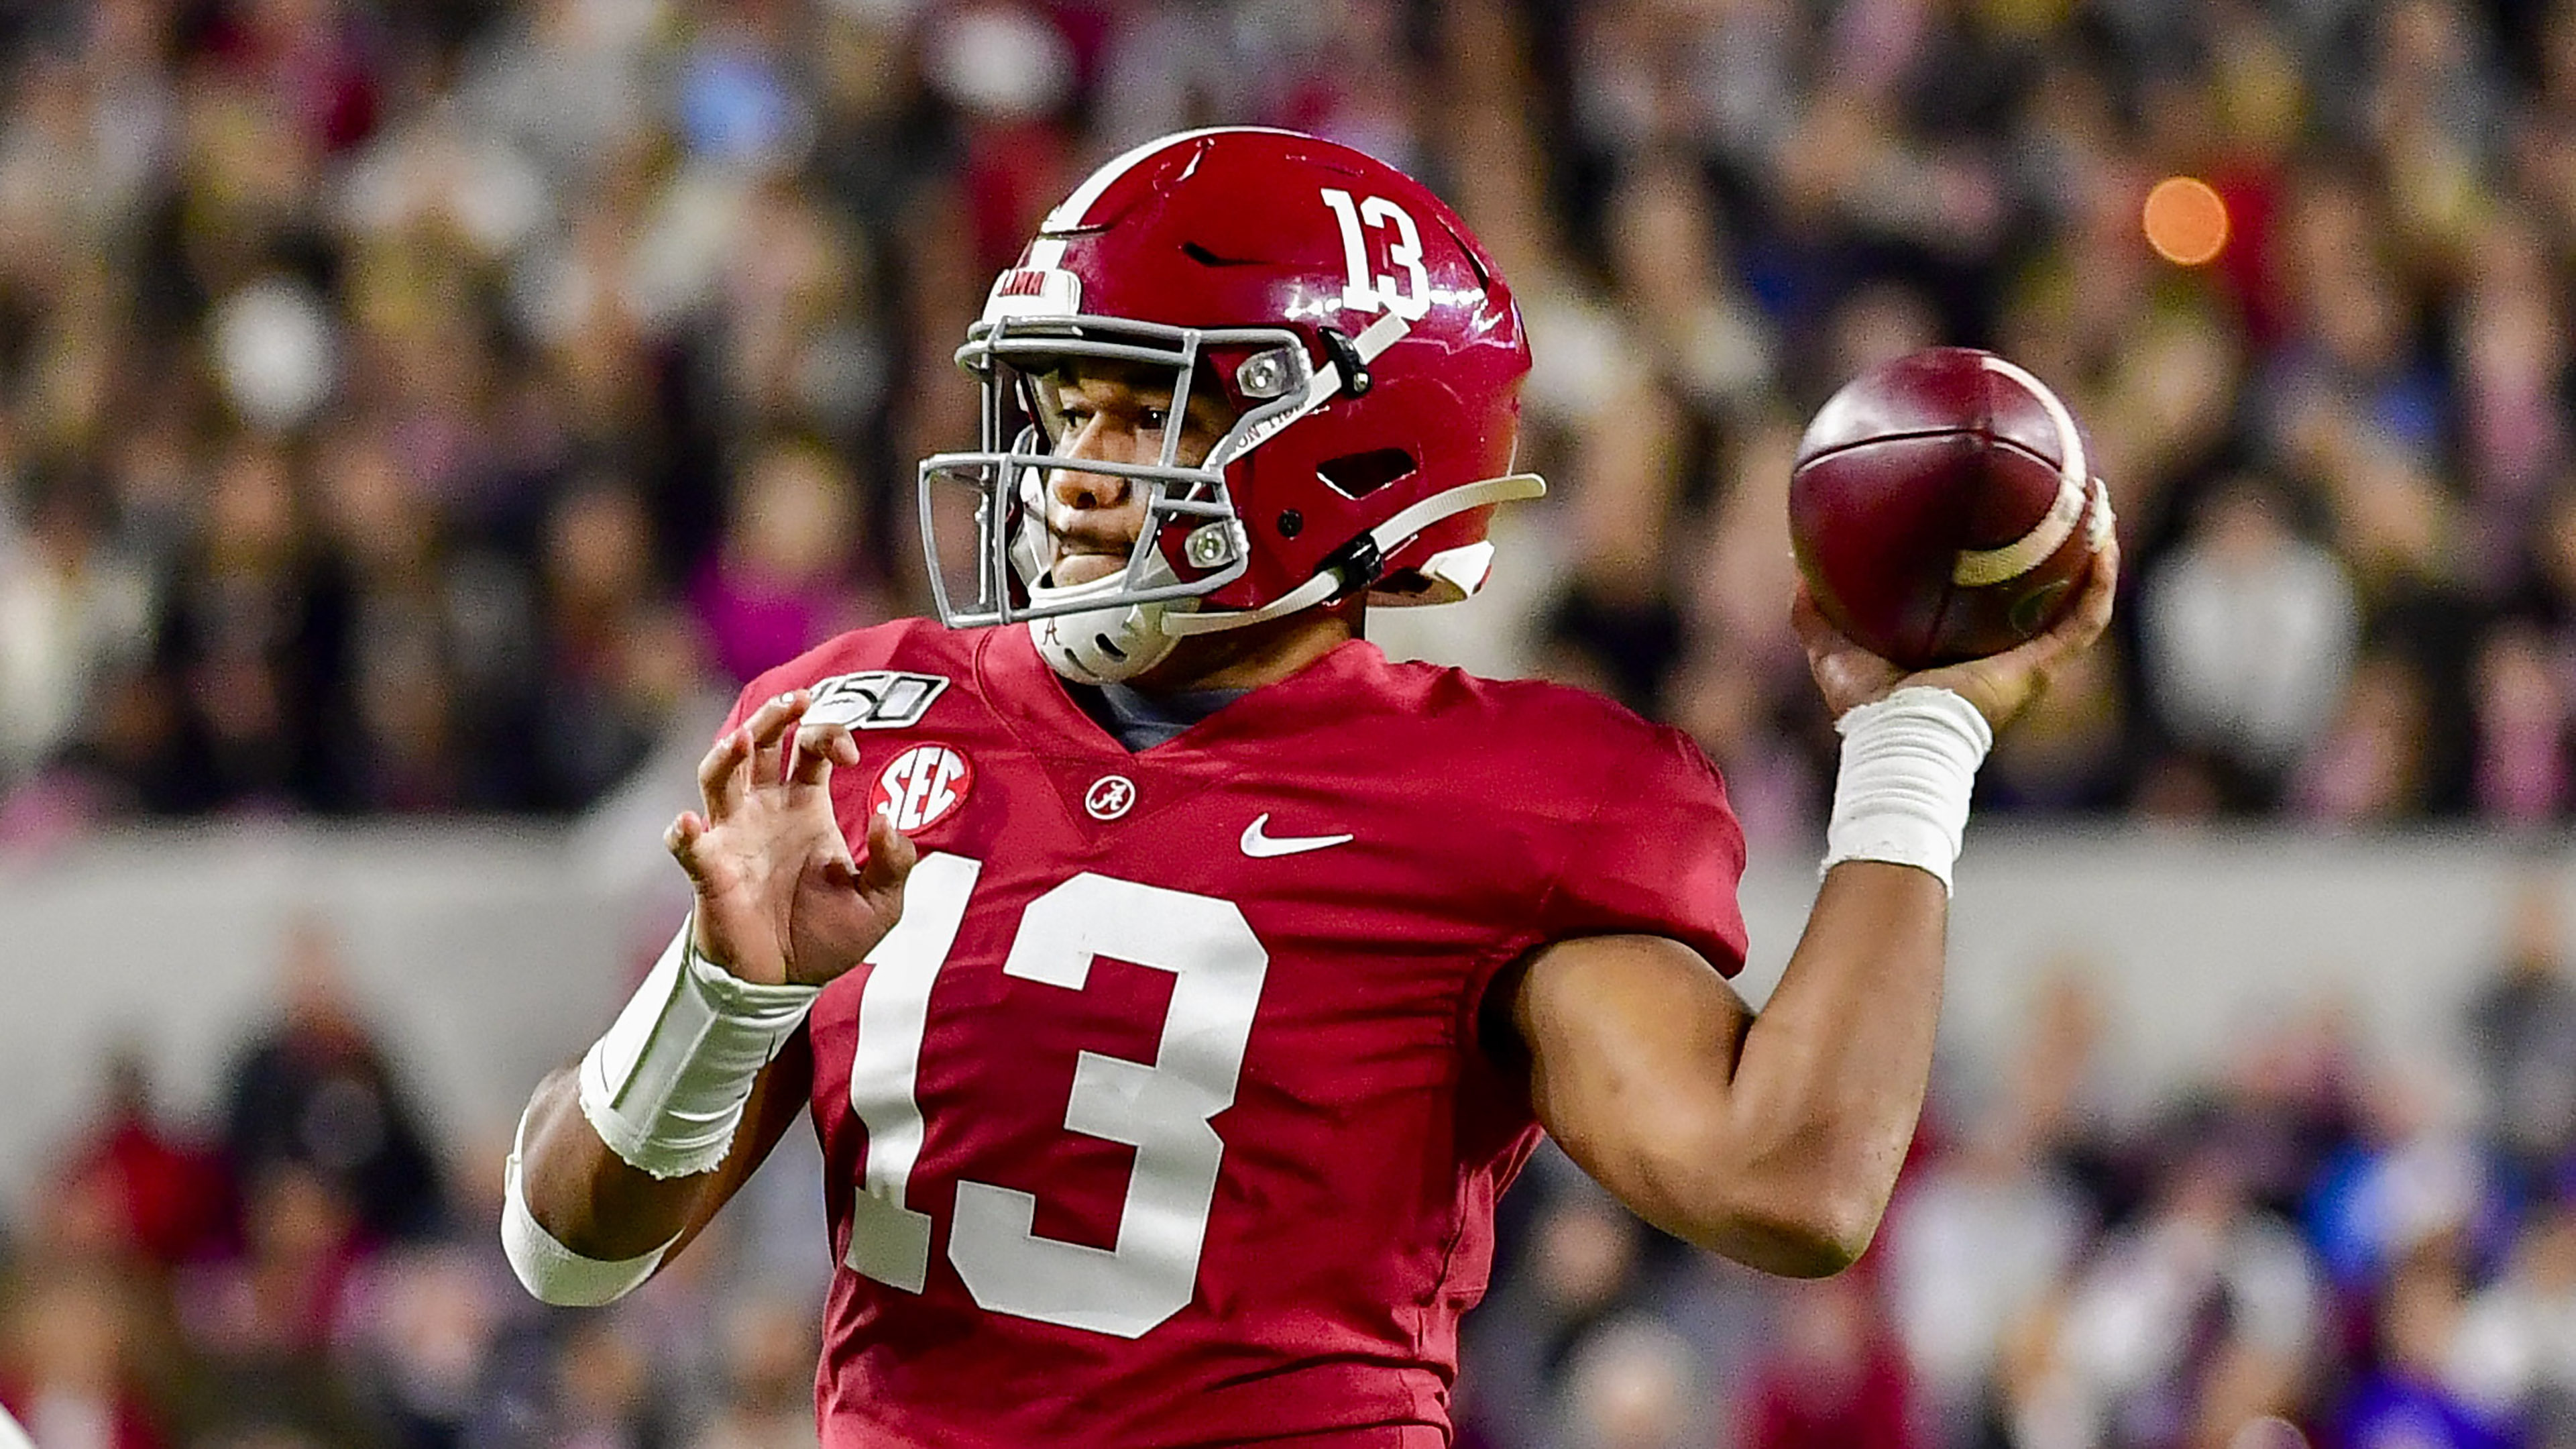 tua dolphins jersey number